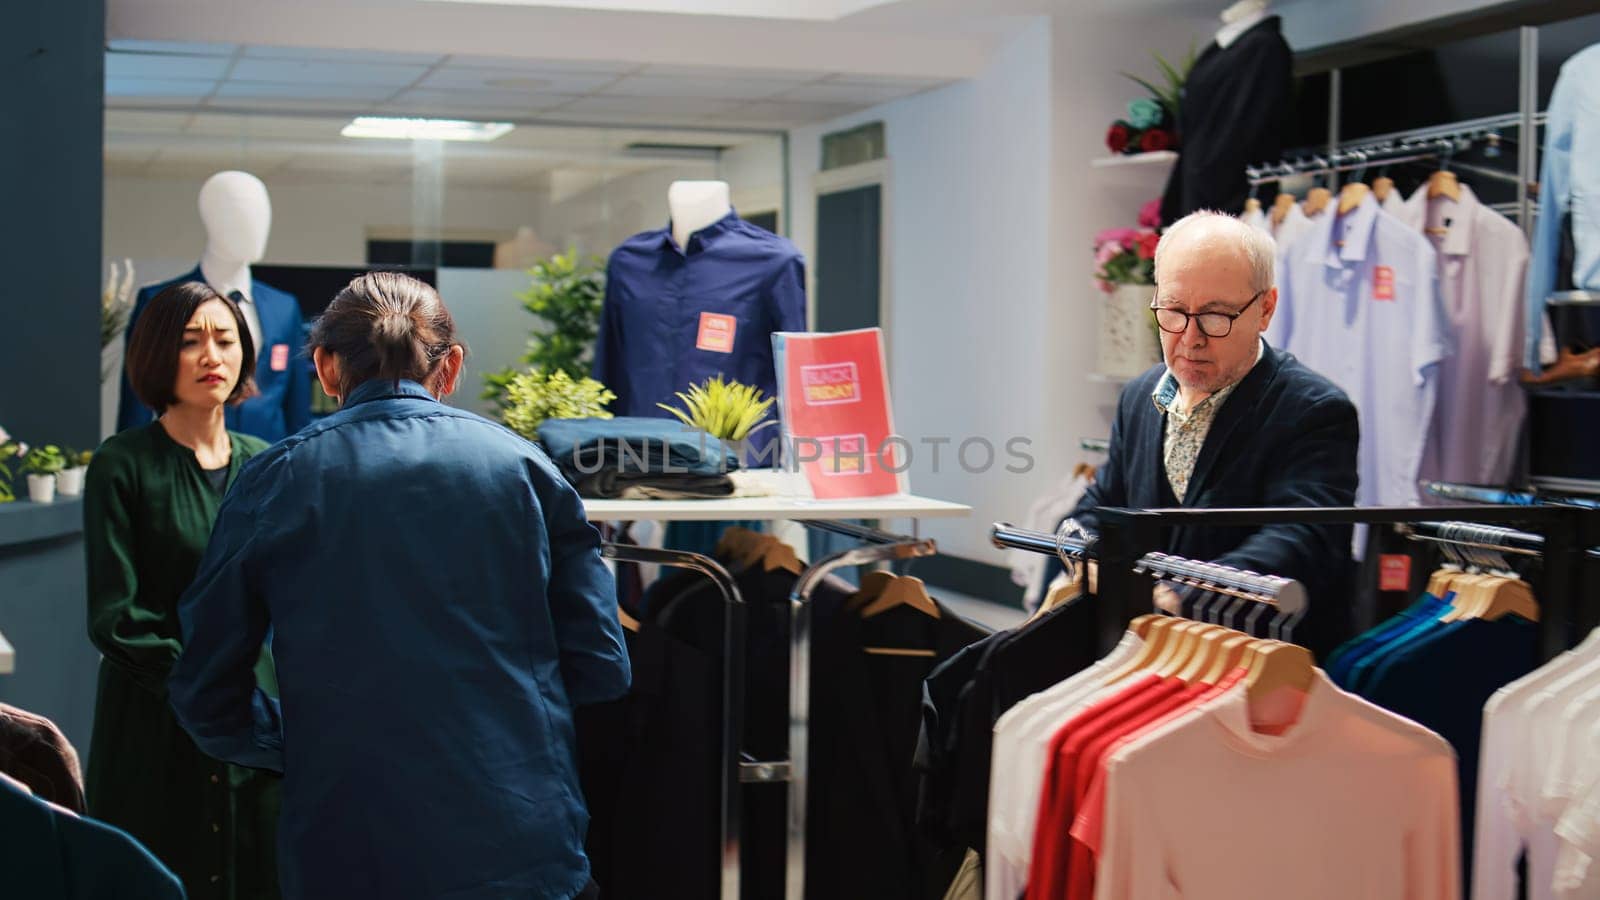 Customers choosing clothes from racks by DCStudio